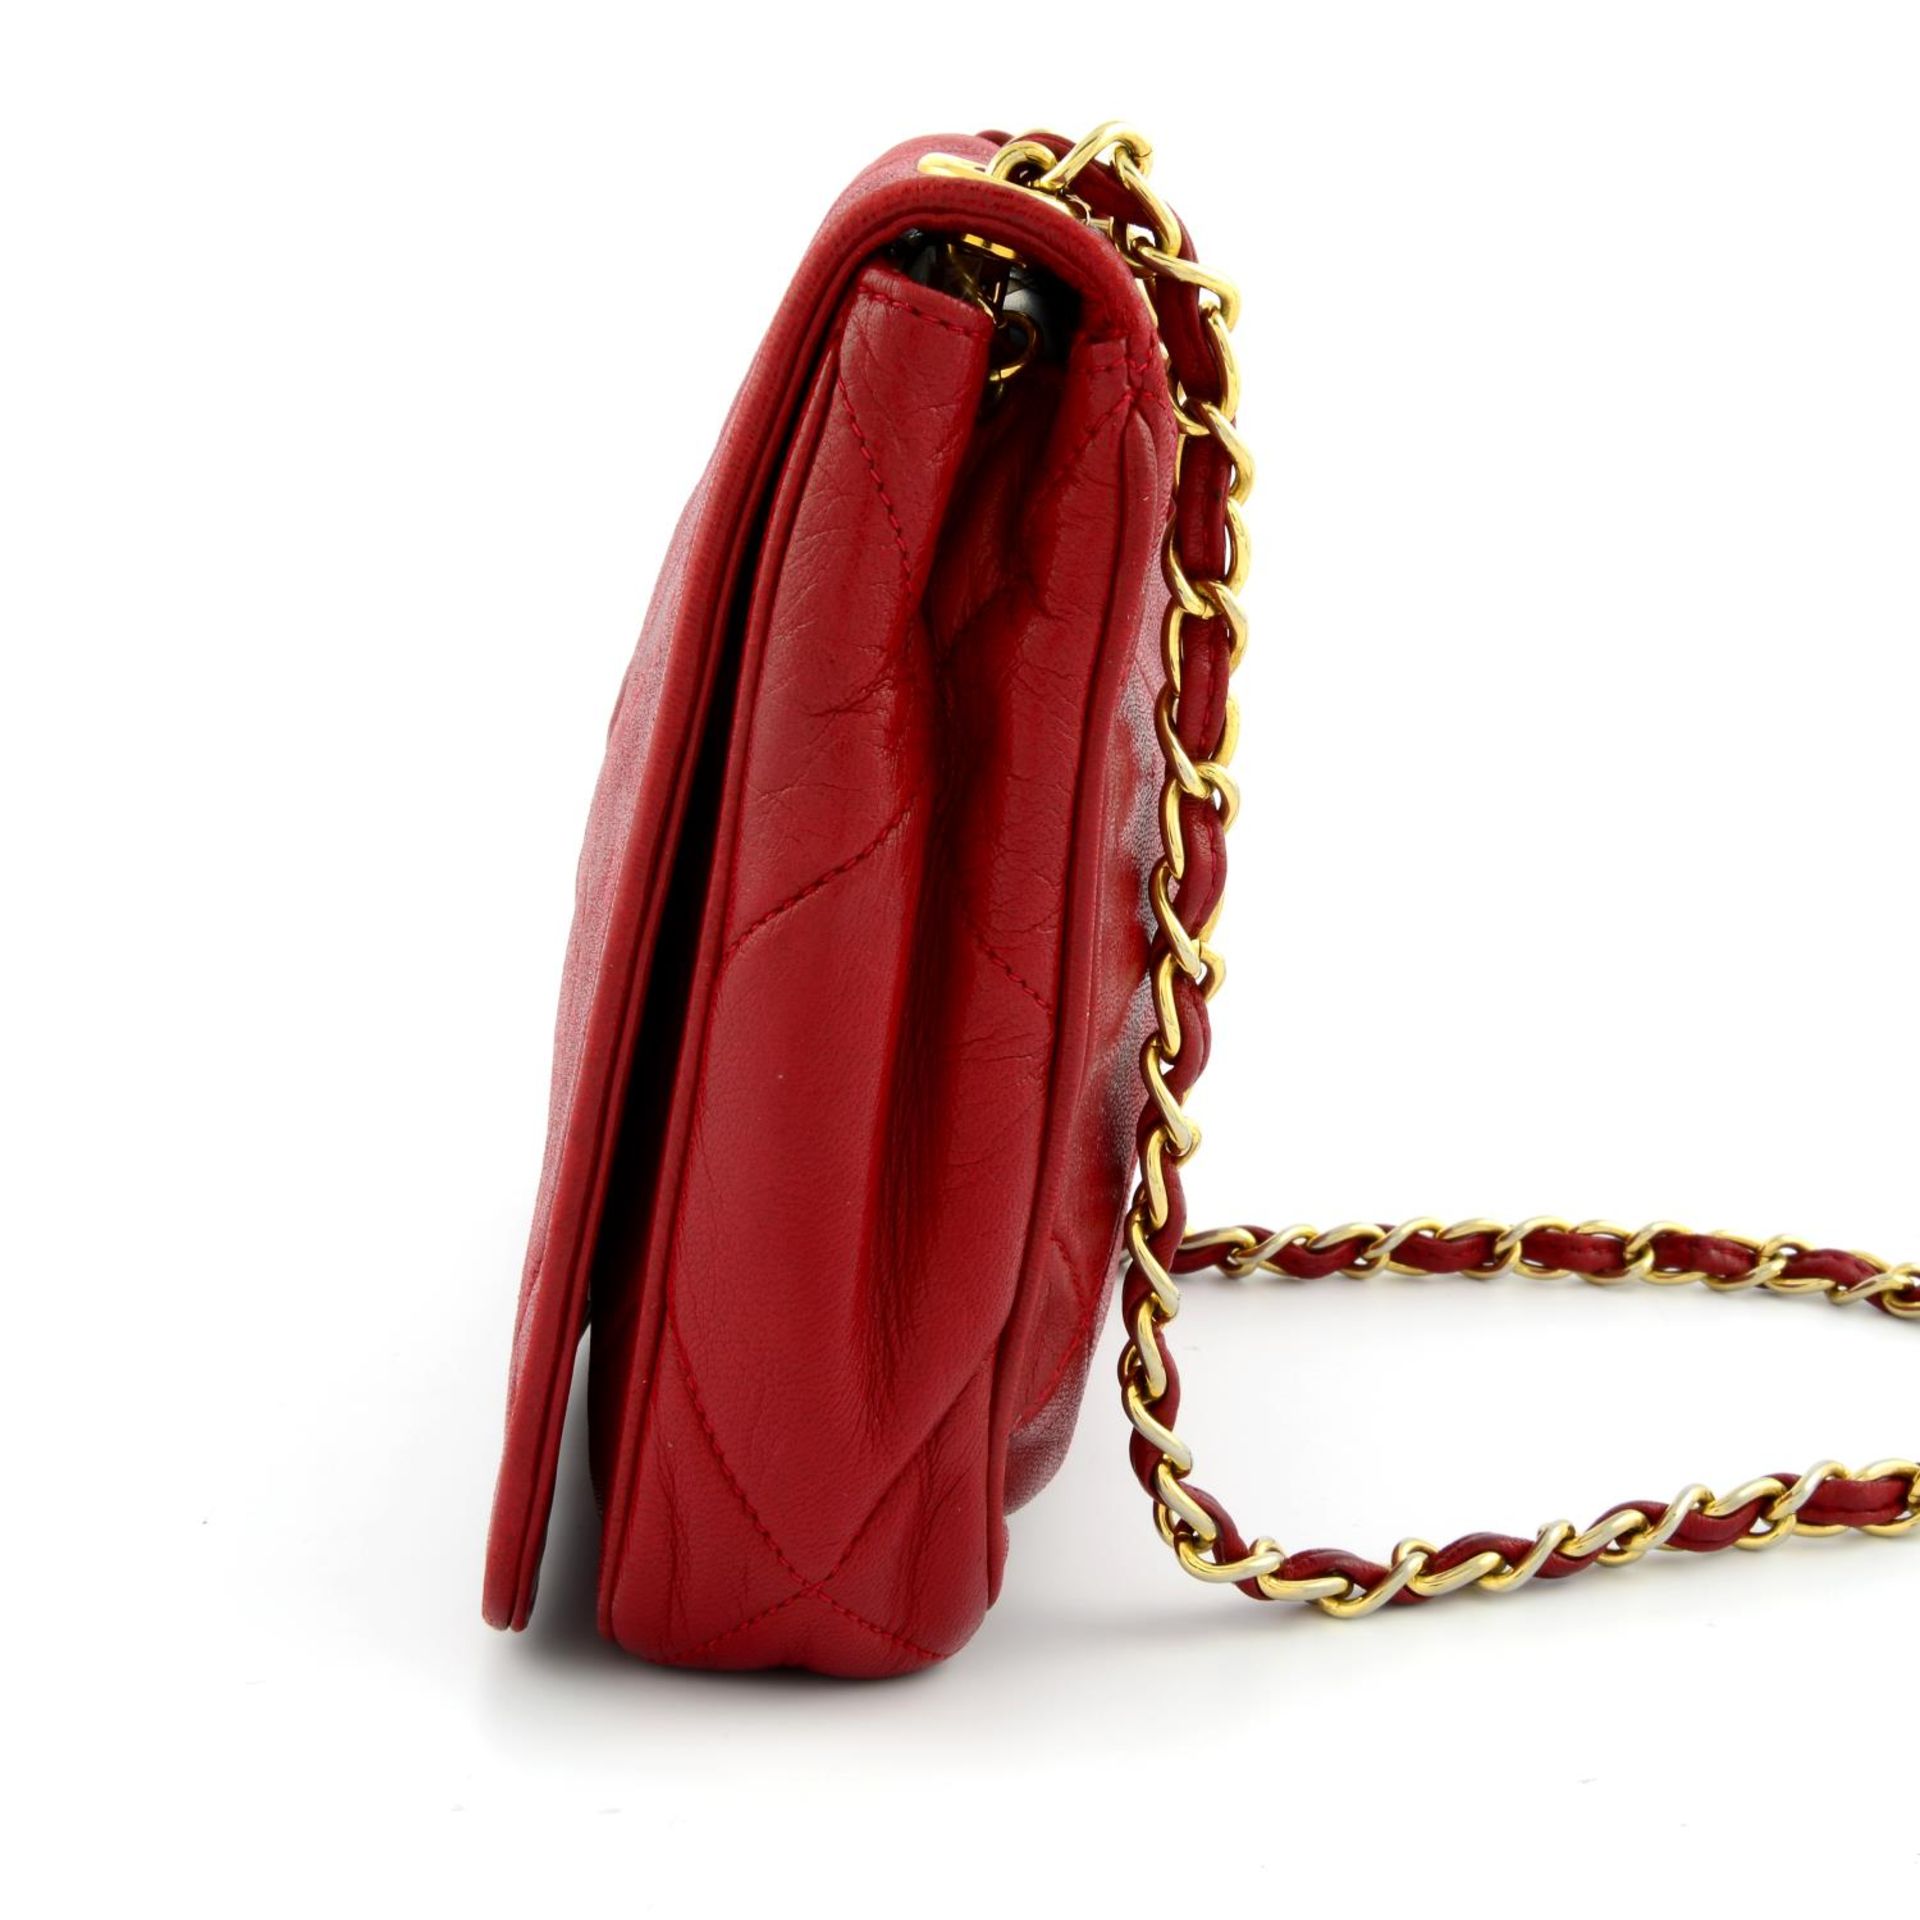 CHANEL - a red leather flap crossbody handbag. - Image 3 of 6